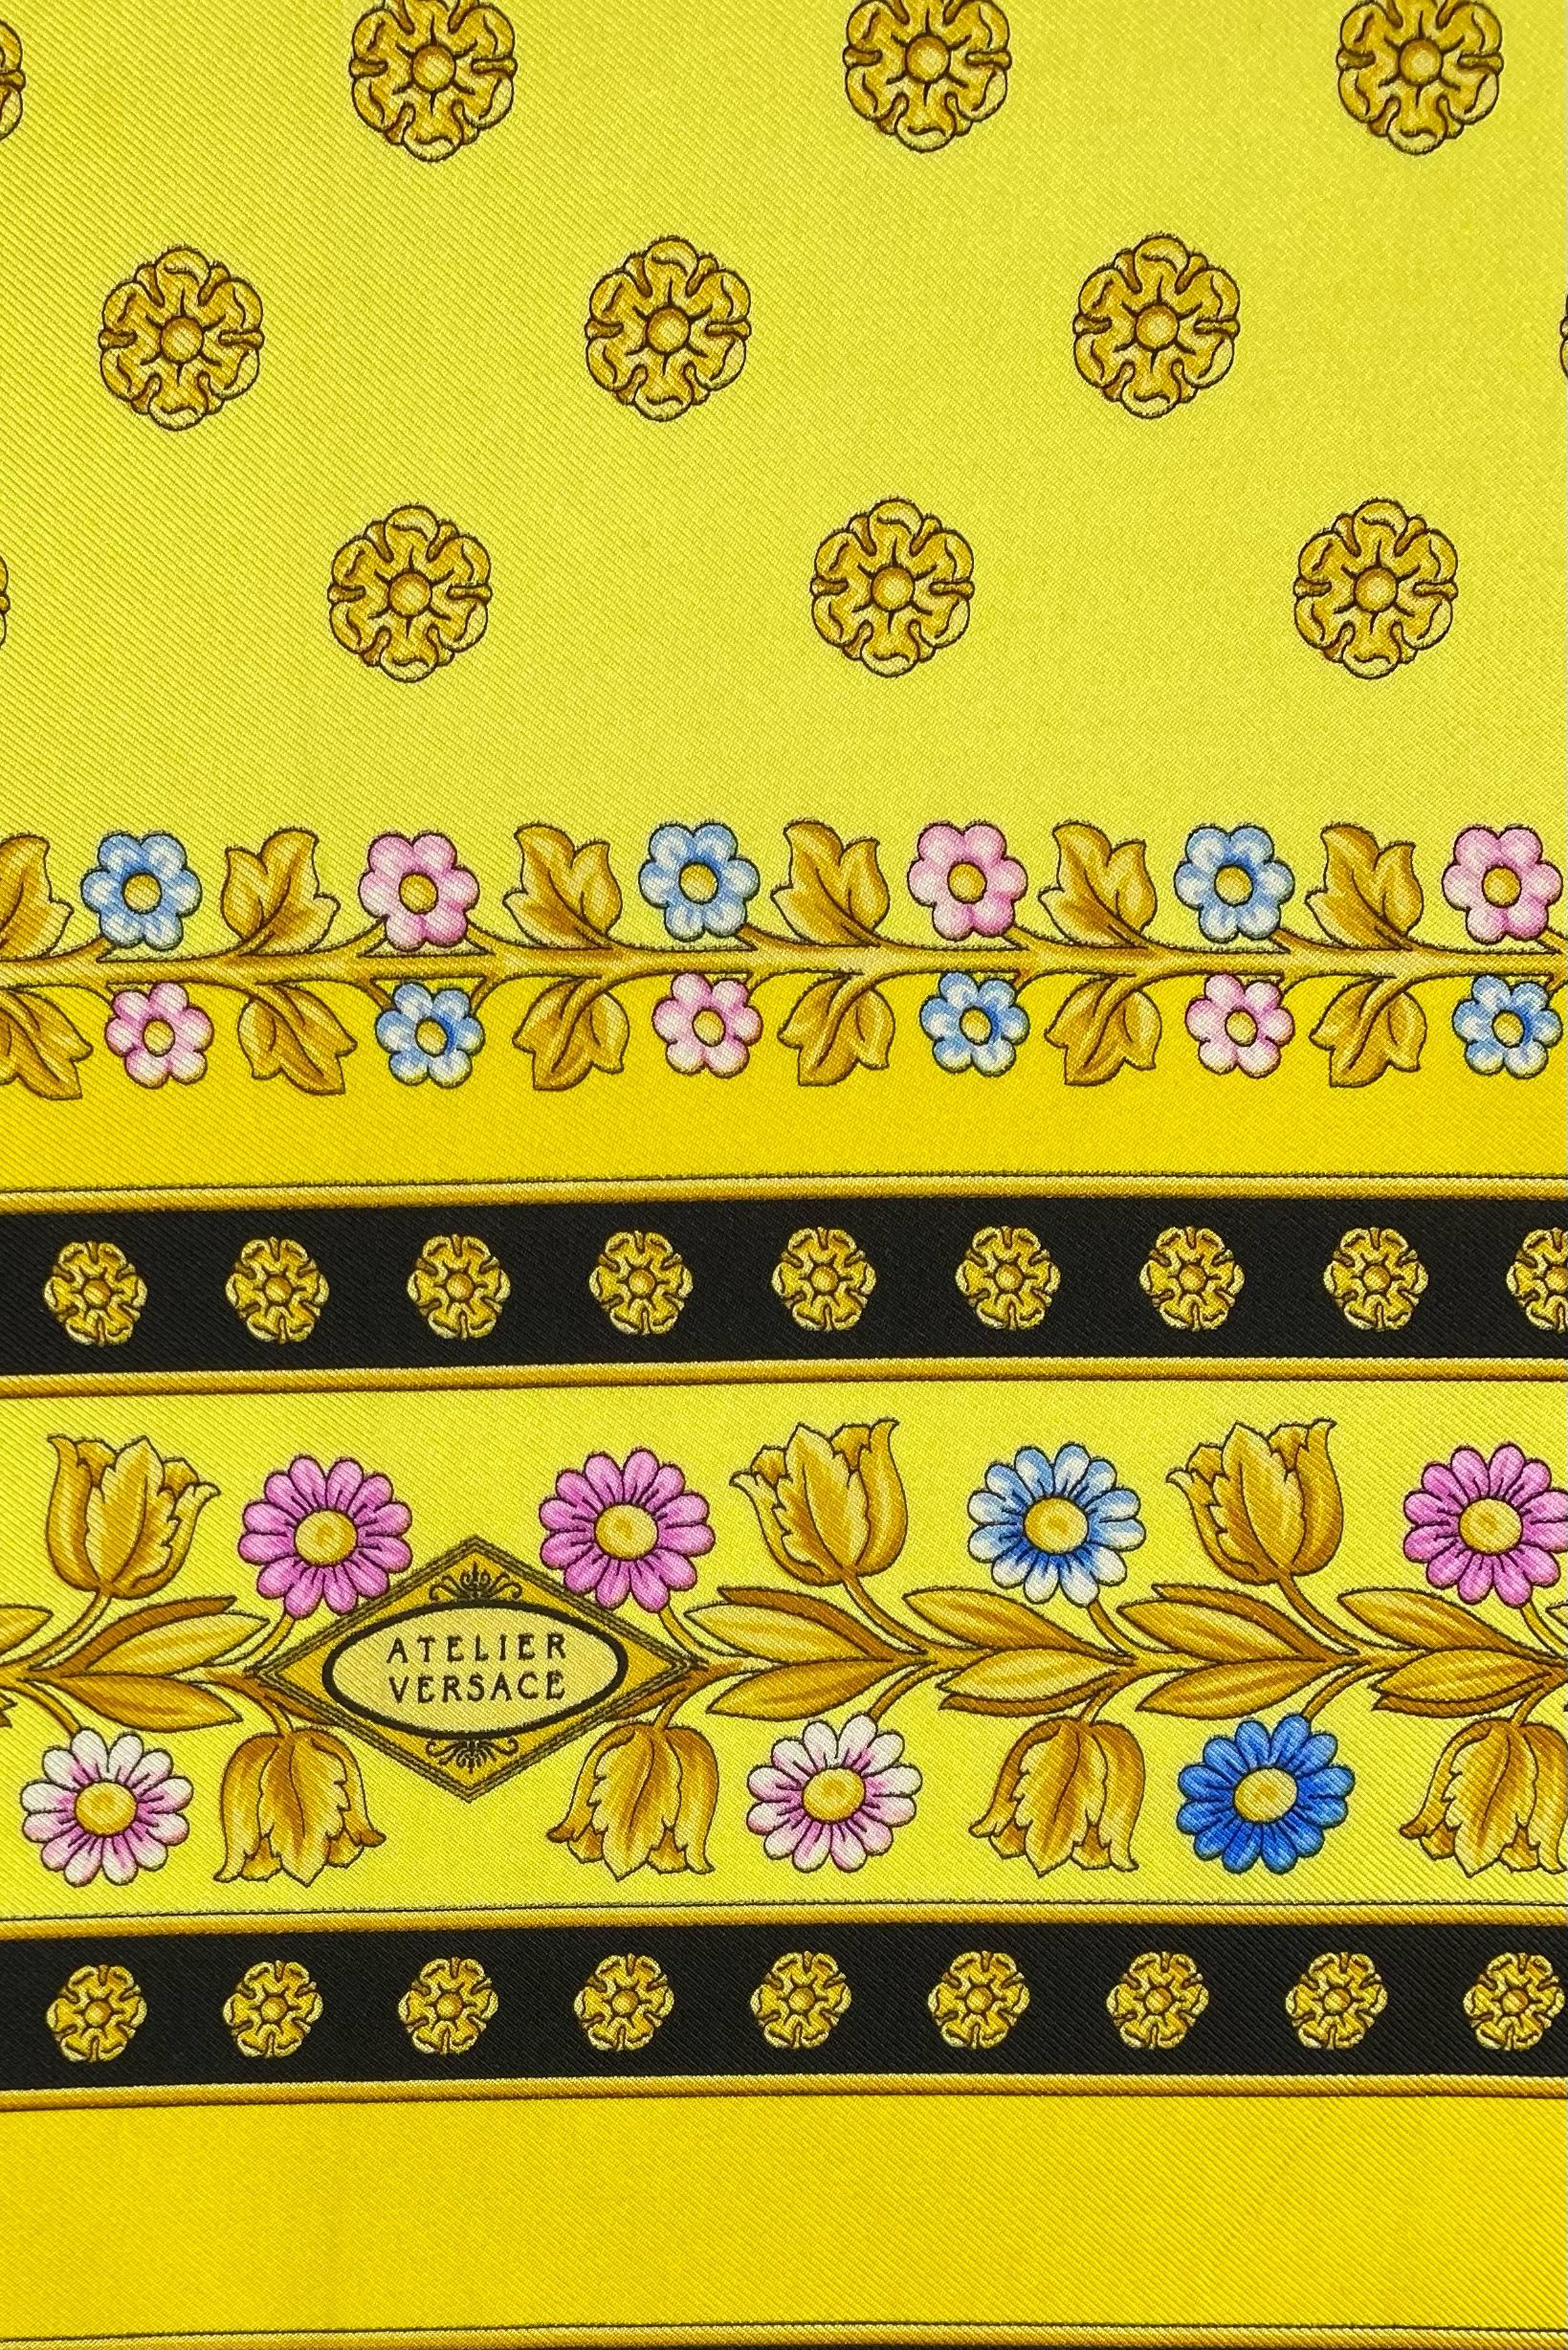 Presenting a beautiful silk Atelier Versace scarf, designed by Gianni Versace. This bright scarf features one of  Versace's classic baroque patterns with floral motifs. The Medusa logo is present directly in the middle of the scarf with the Atelier